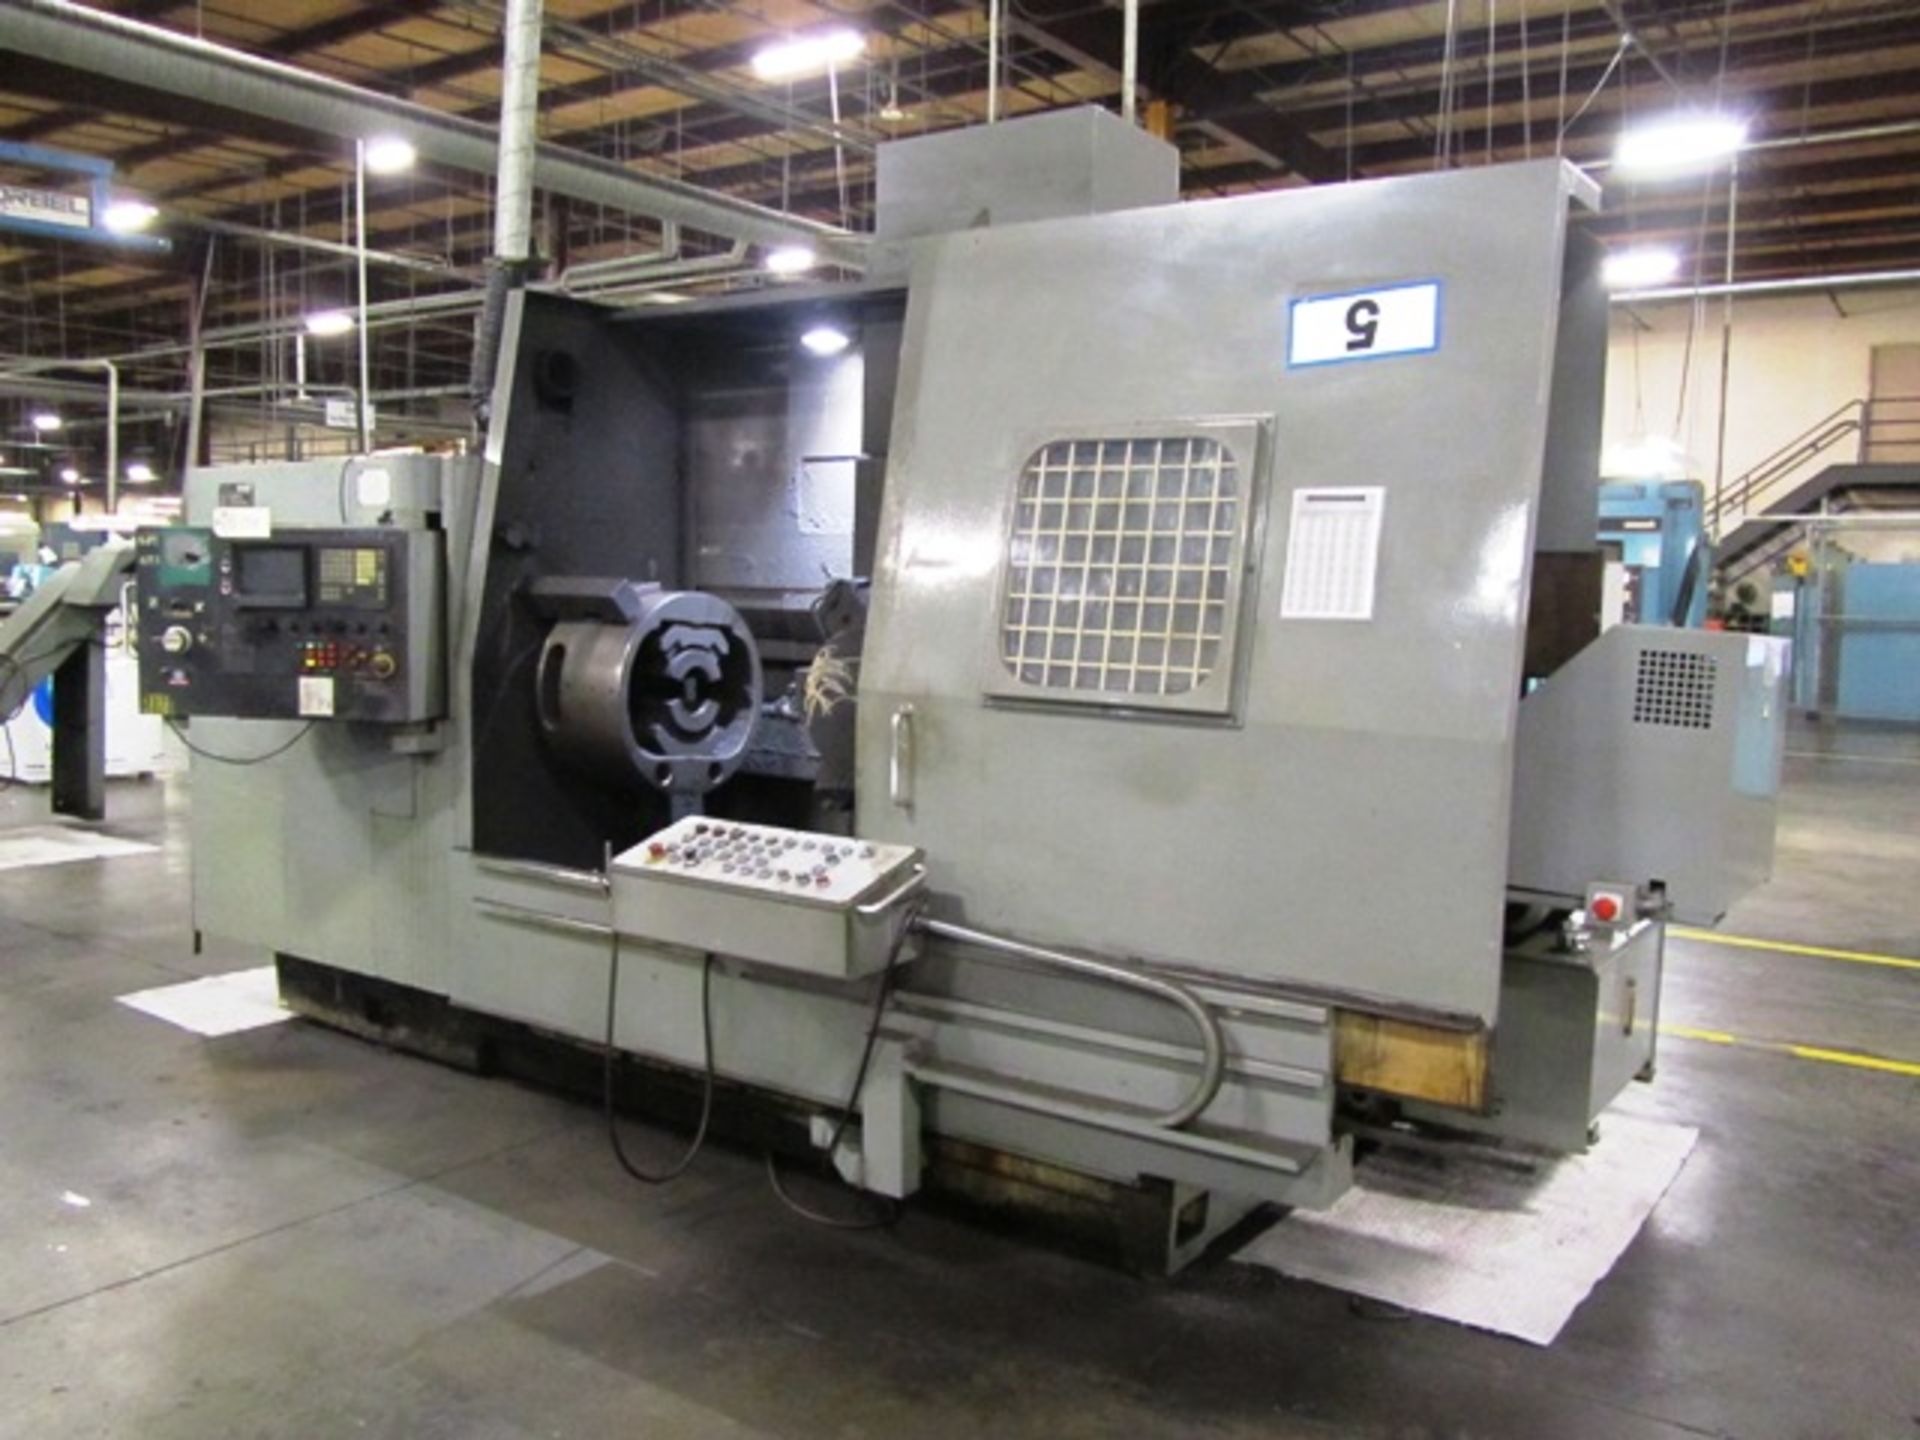 Matrix Churchill Type 7/45 CNC Chucker with 8 Position Turret, Forkardt 24'' Indexing Chuck, Fanuc